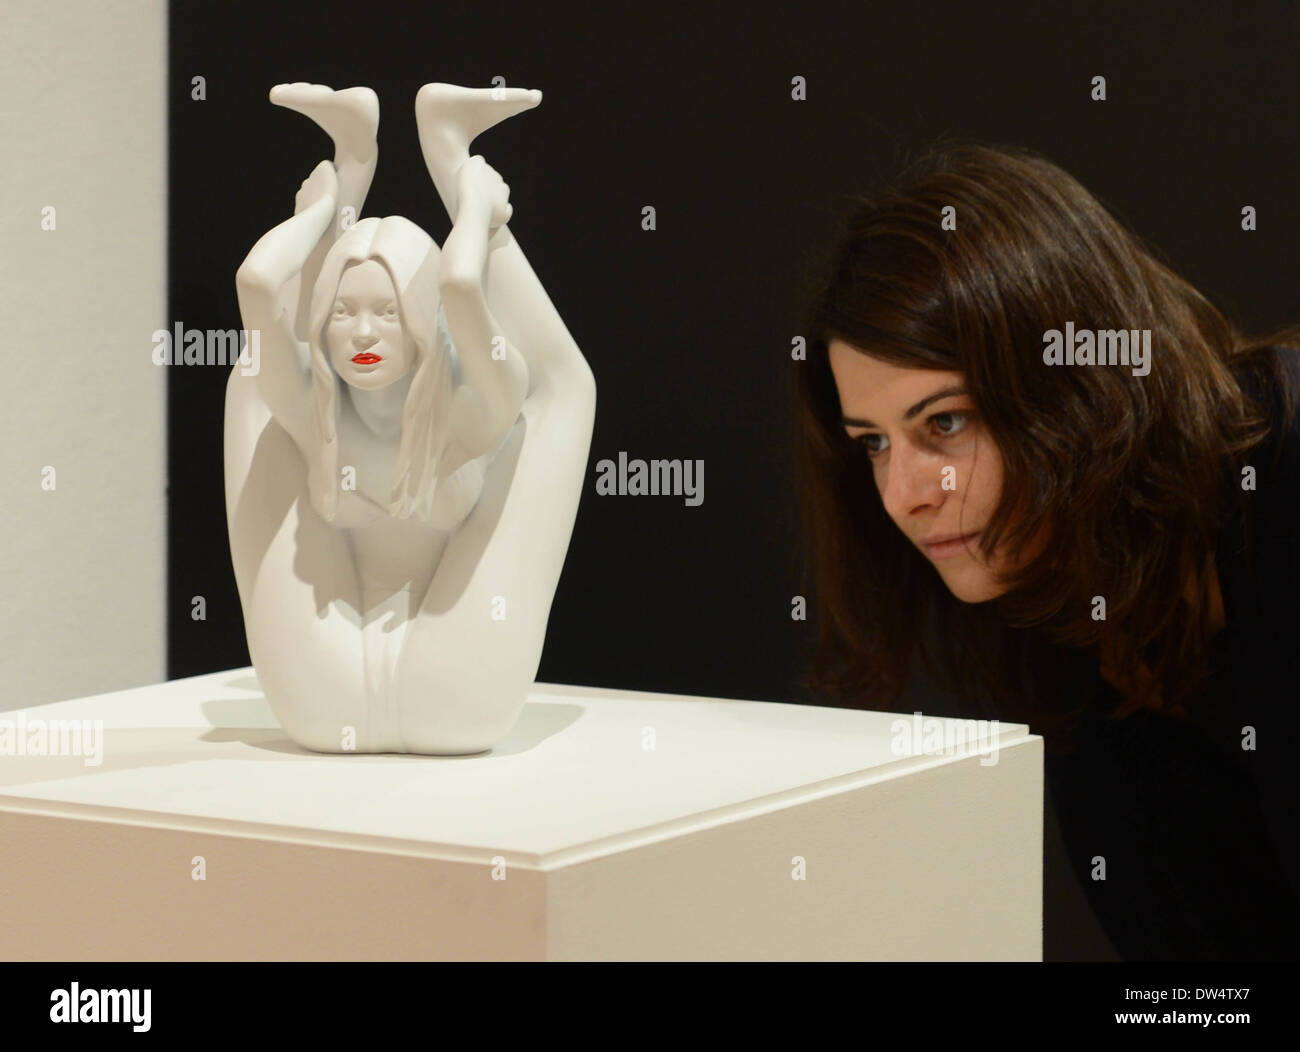 Marc Quinn's sculpture of Kate Moss on the display at Bonhams 'Contemporary Art & Design' sale London, England- 08.10.12 Where: London, United Kingdom When: 08 Oct 2012 Stock Photo